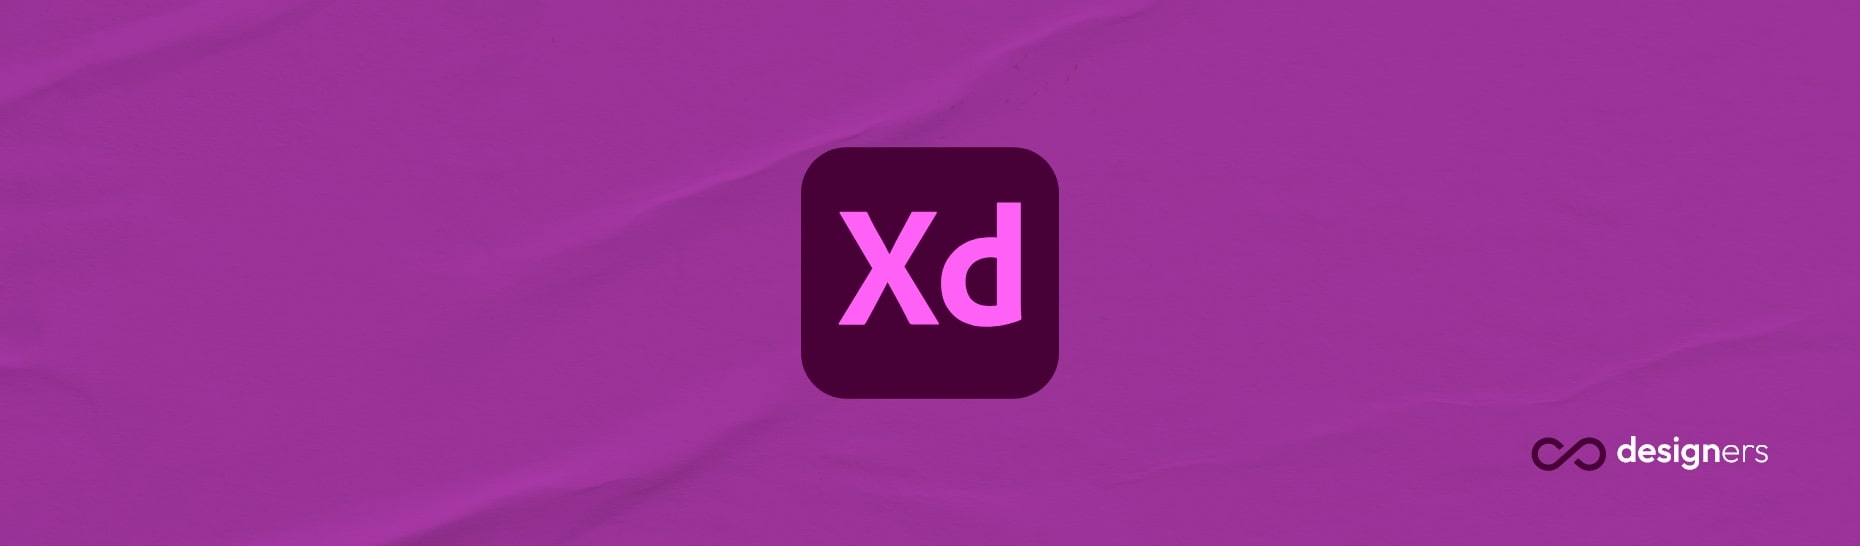 What is better than Adobe XD?